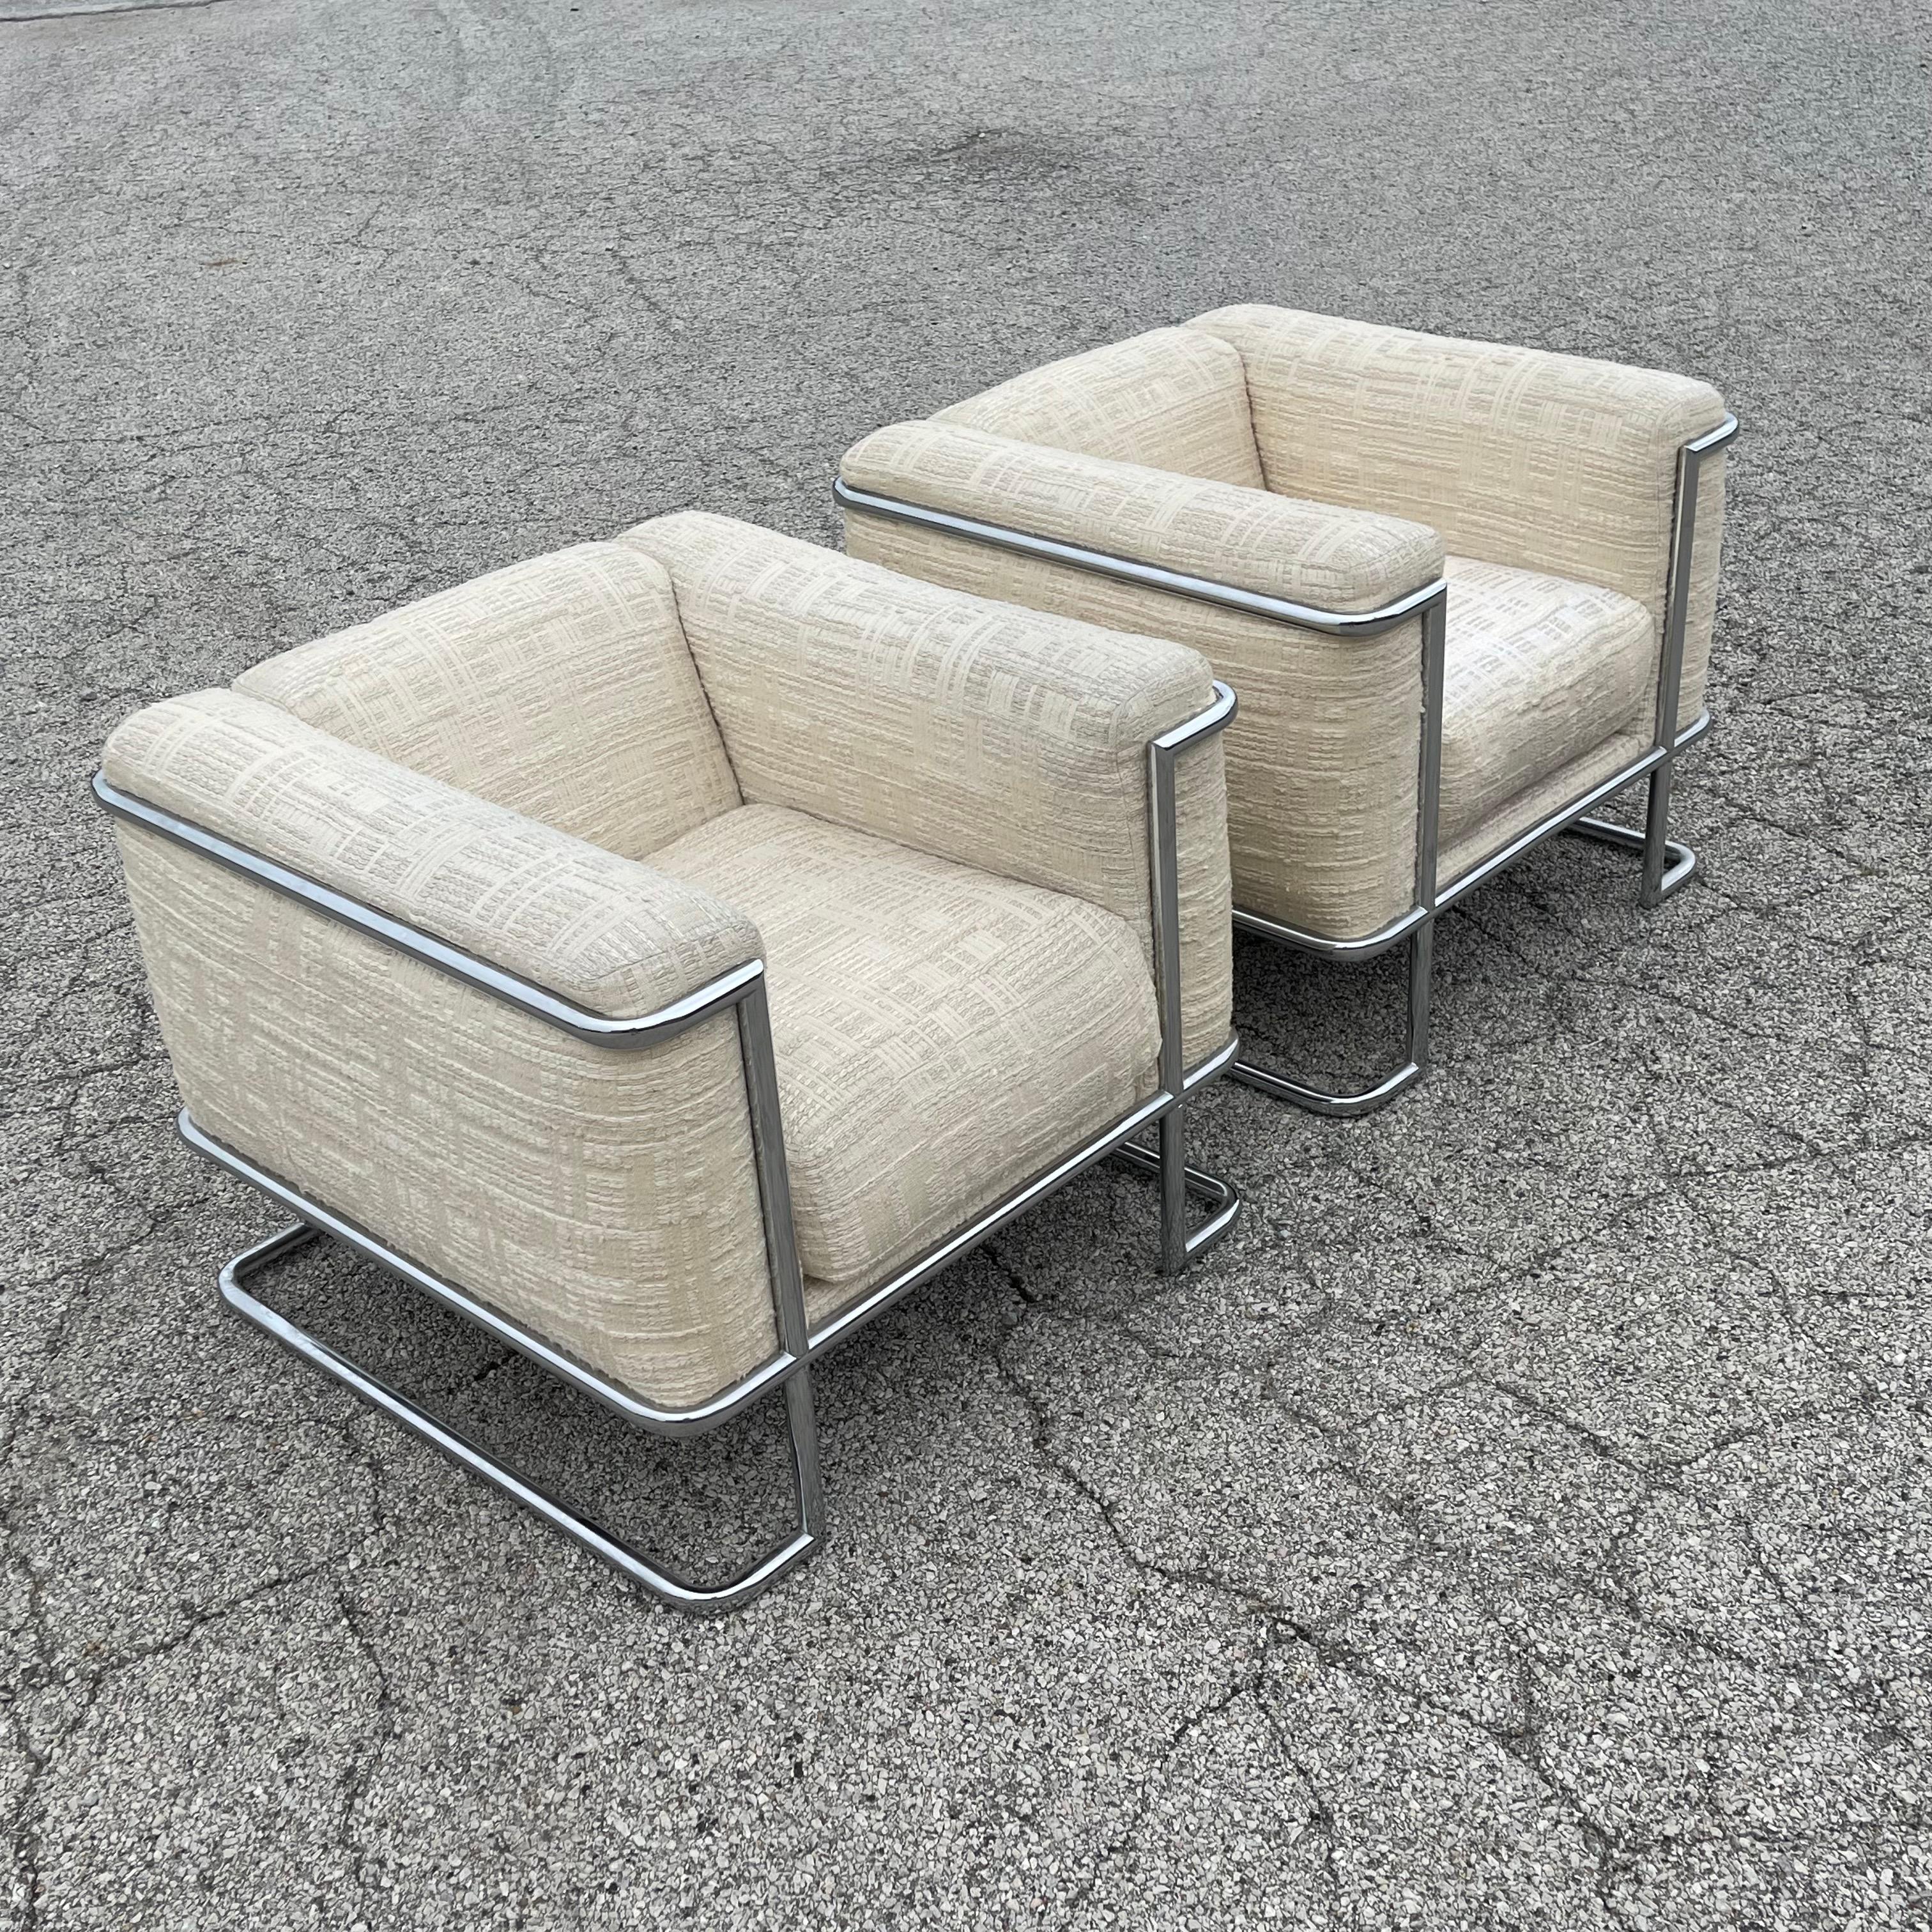 This strikingly handsome and quite rare cube lounge chairs designed by John Mascheroni for Swaim Originals have external frames of tubular chromed steel. The unique design references Le Corbusier's 1929 